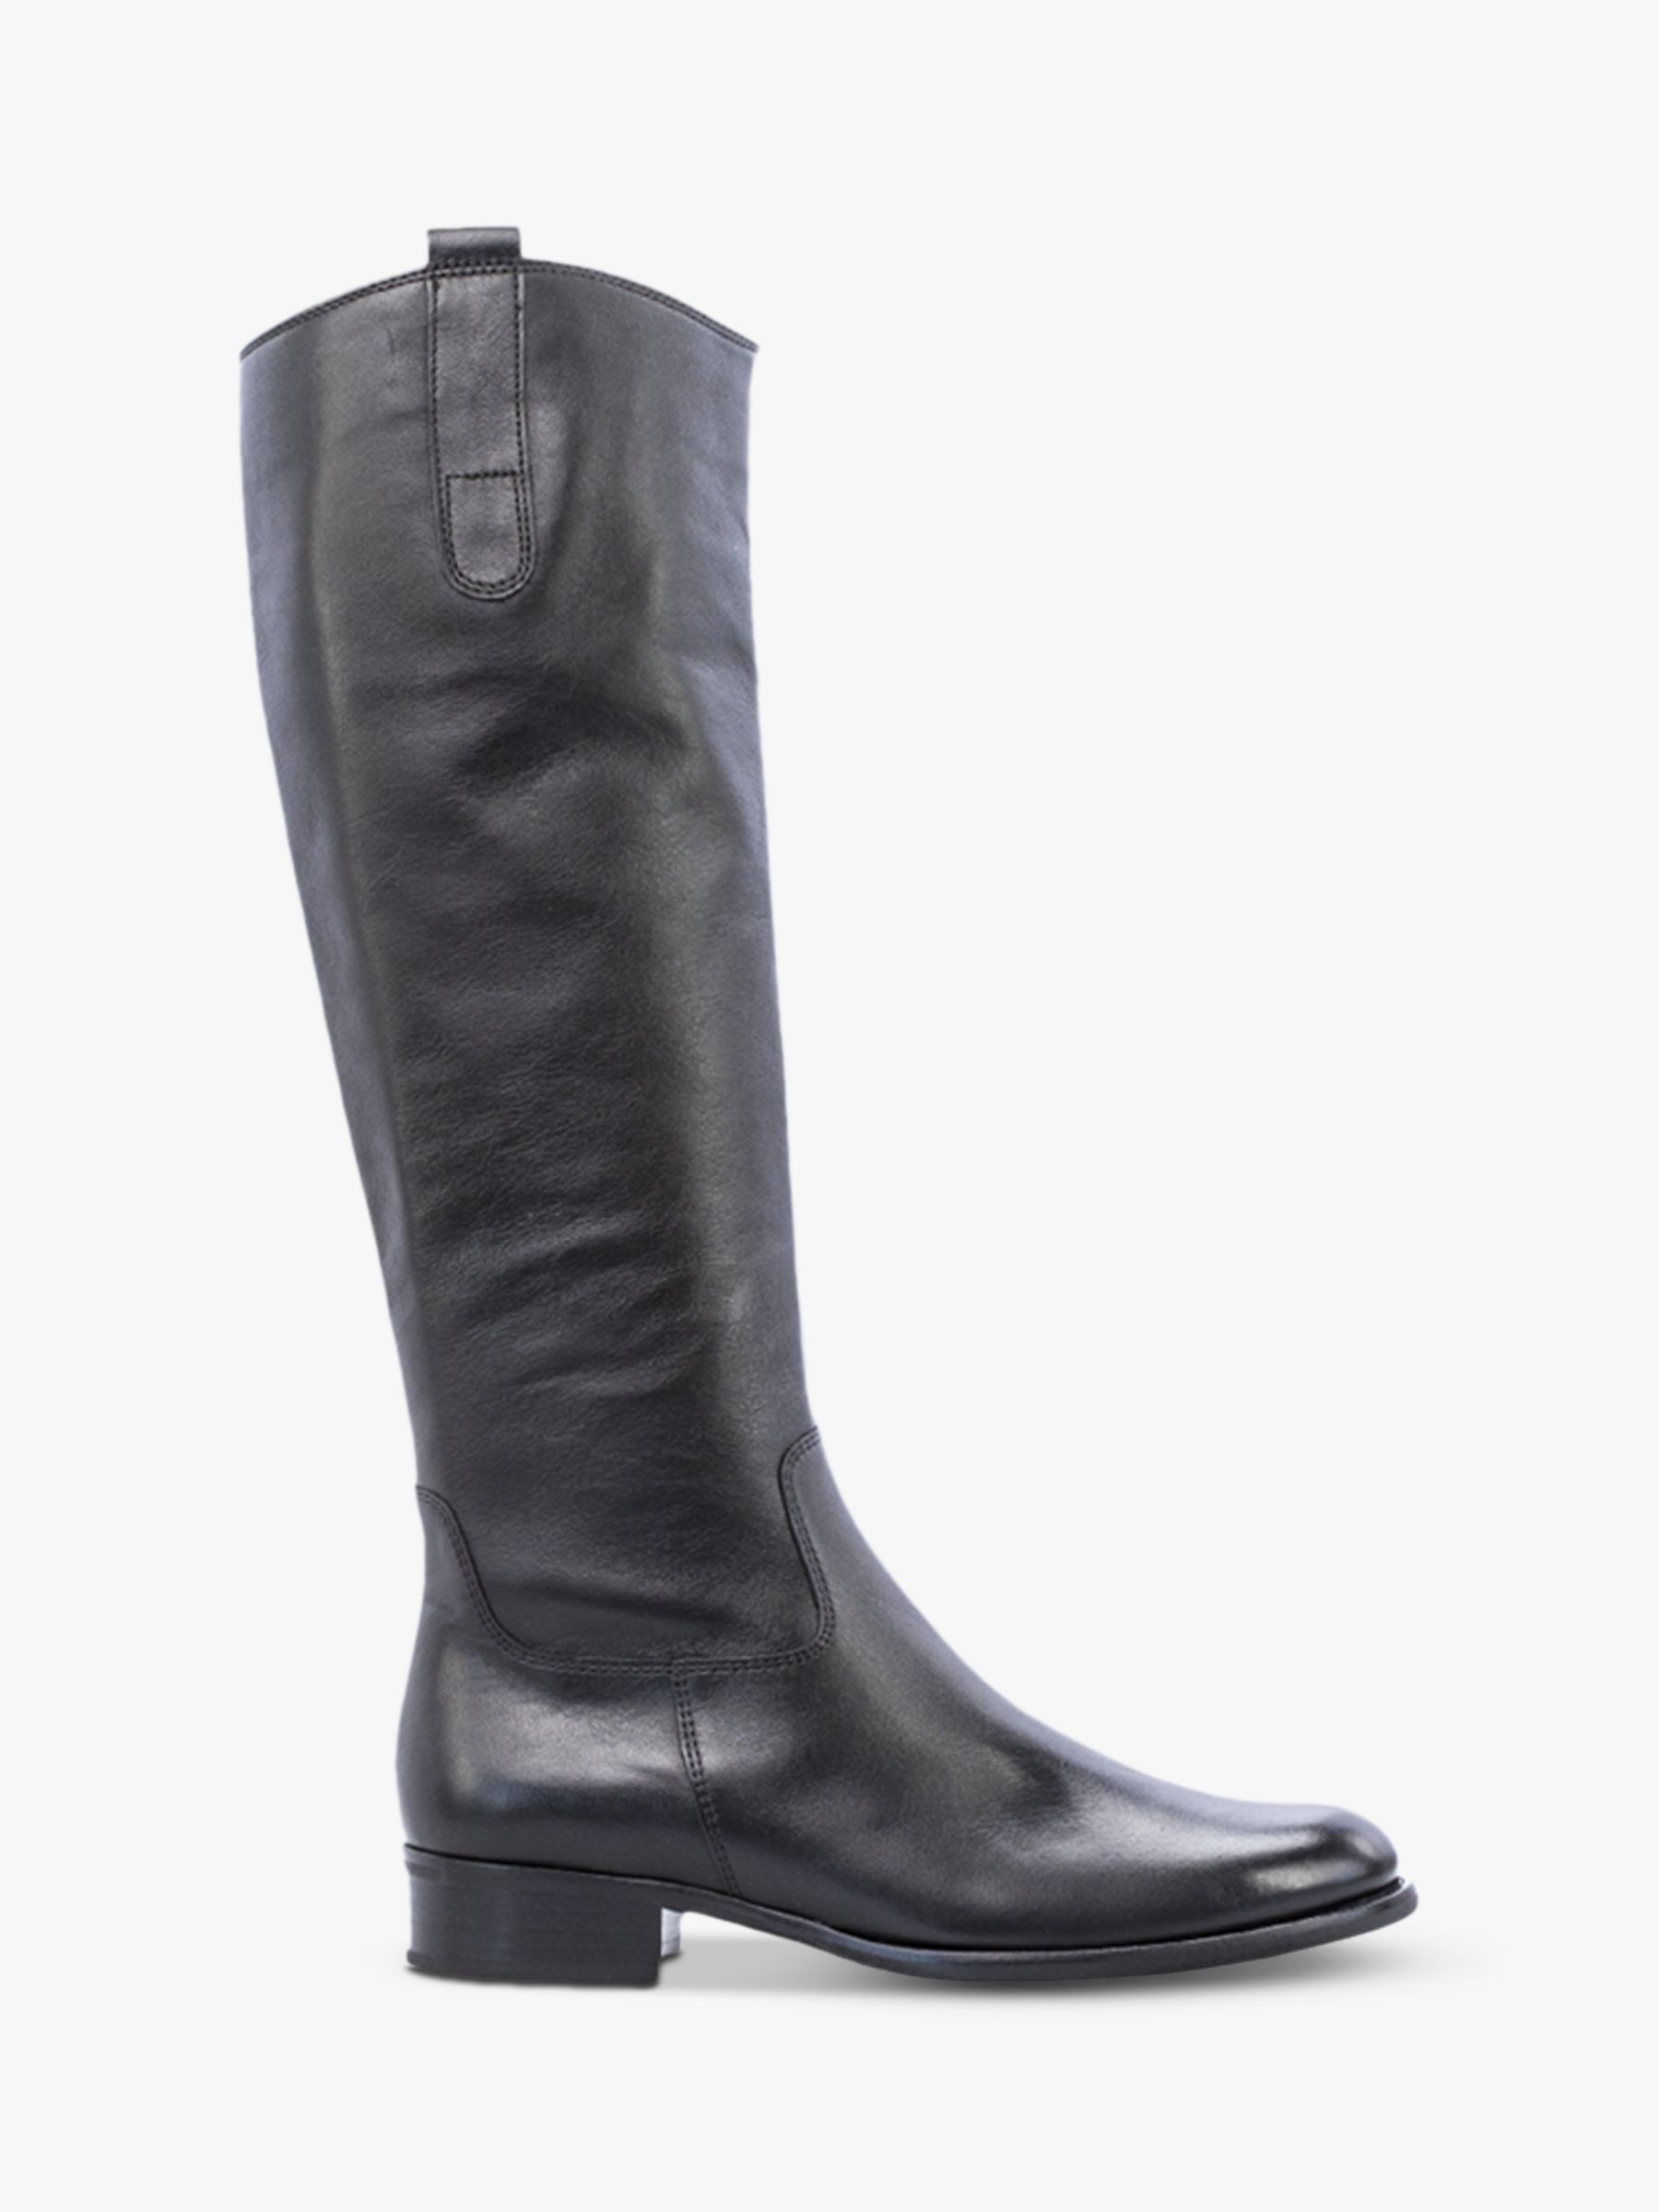 Gabor Brook Fit Leather Low Heeled Knee High Boots, Black at Lewis & Partners